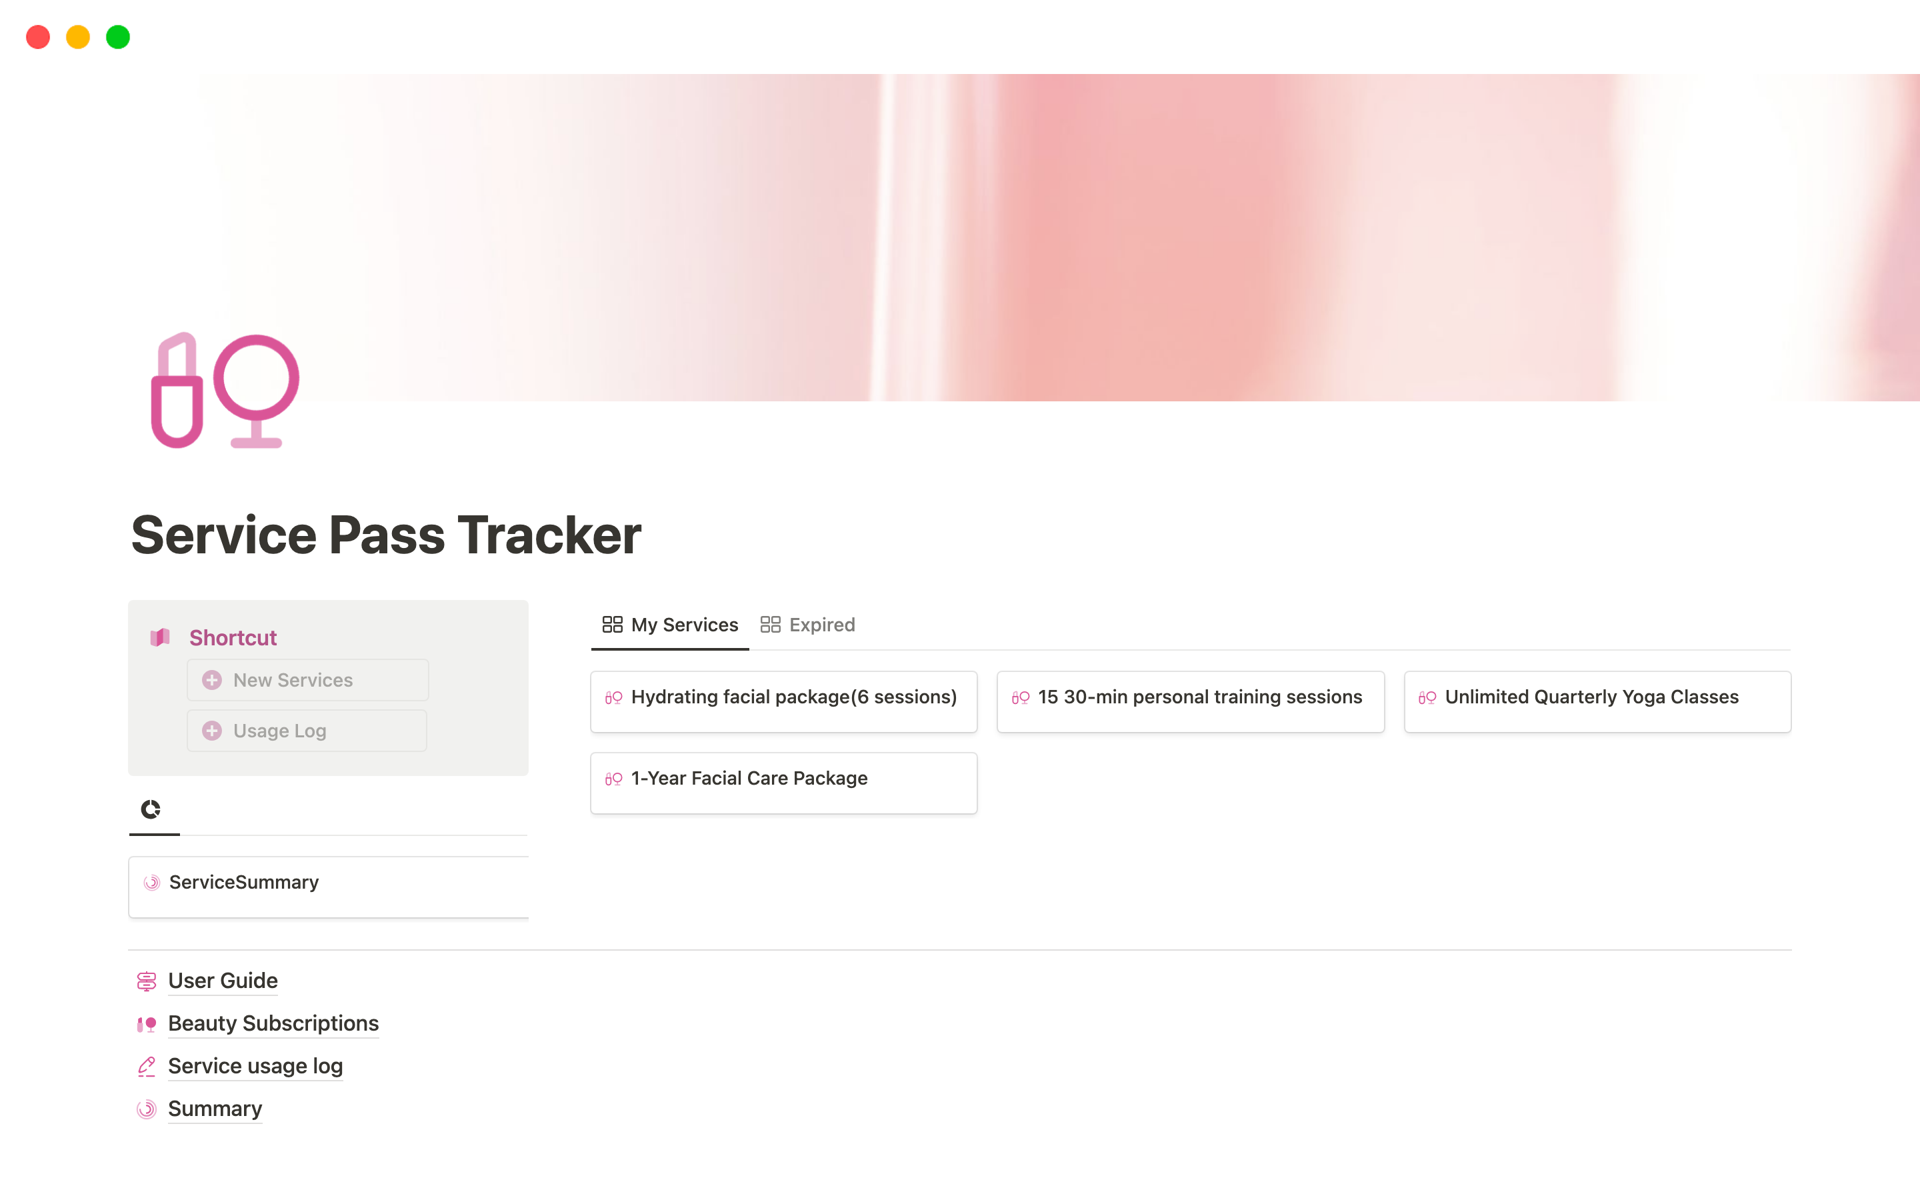 Unexpired prepaid service cards piling up unused? Struggling to track purchased sessions for beauty, fitness, healthcare? This Notion Service Pass Tracker takes control - designed for busy users to easily log and access usage metrics and expiration.